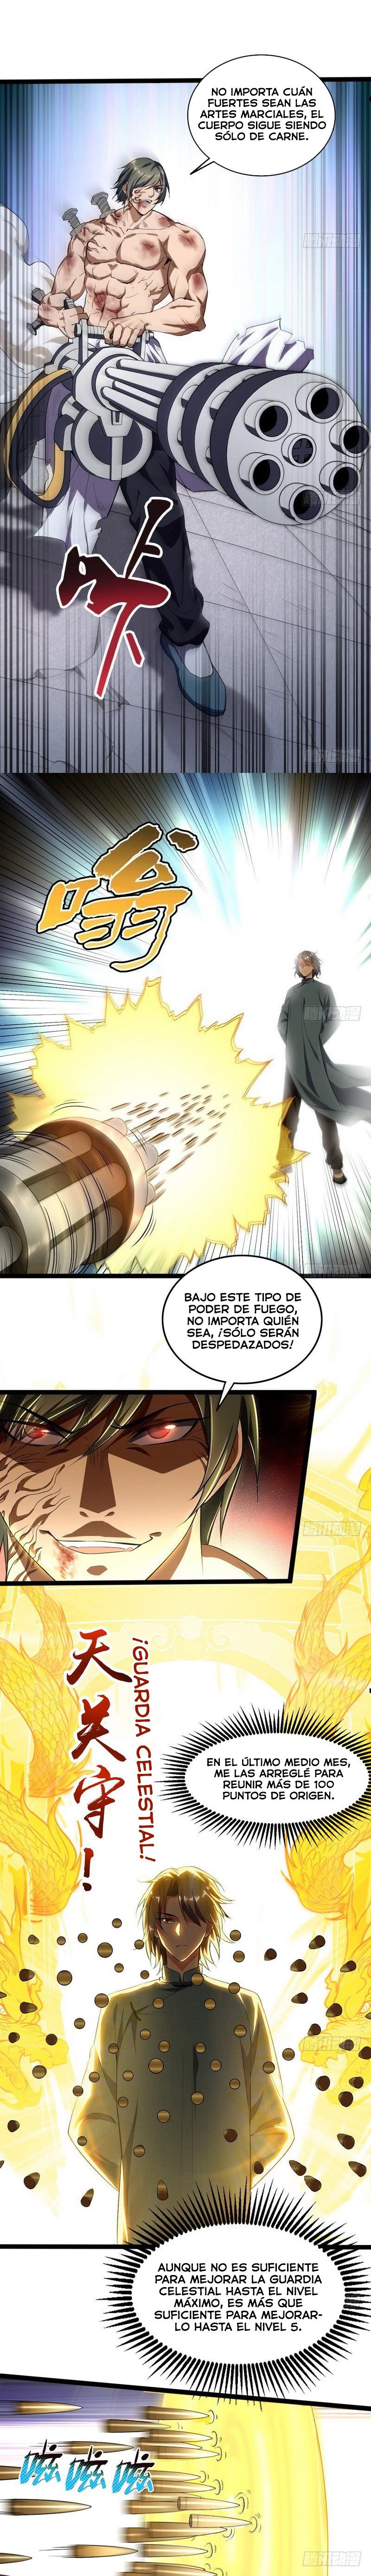 Manga Soy un dios maligno Chapter 20 image number 8